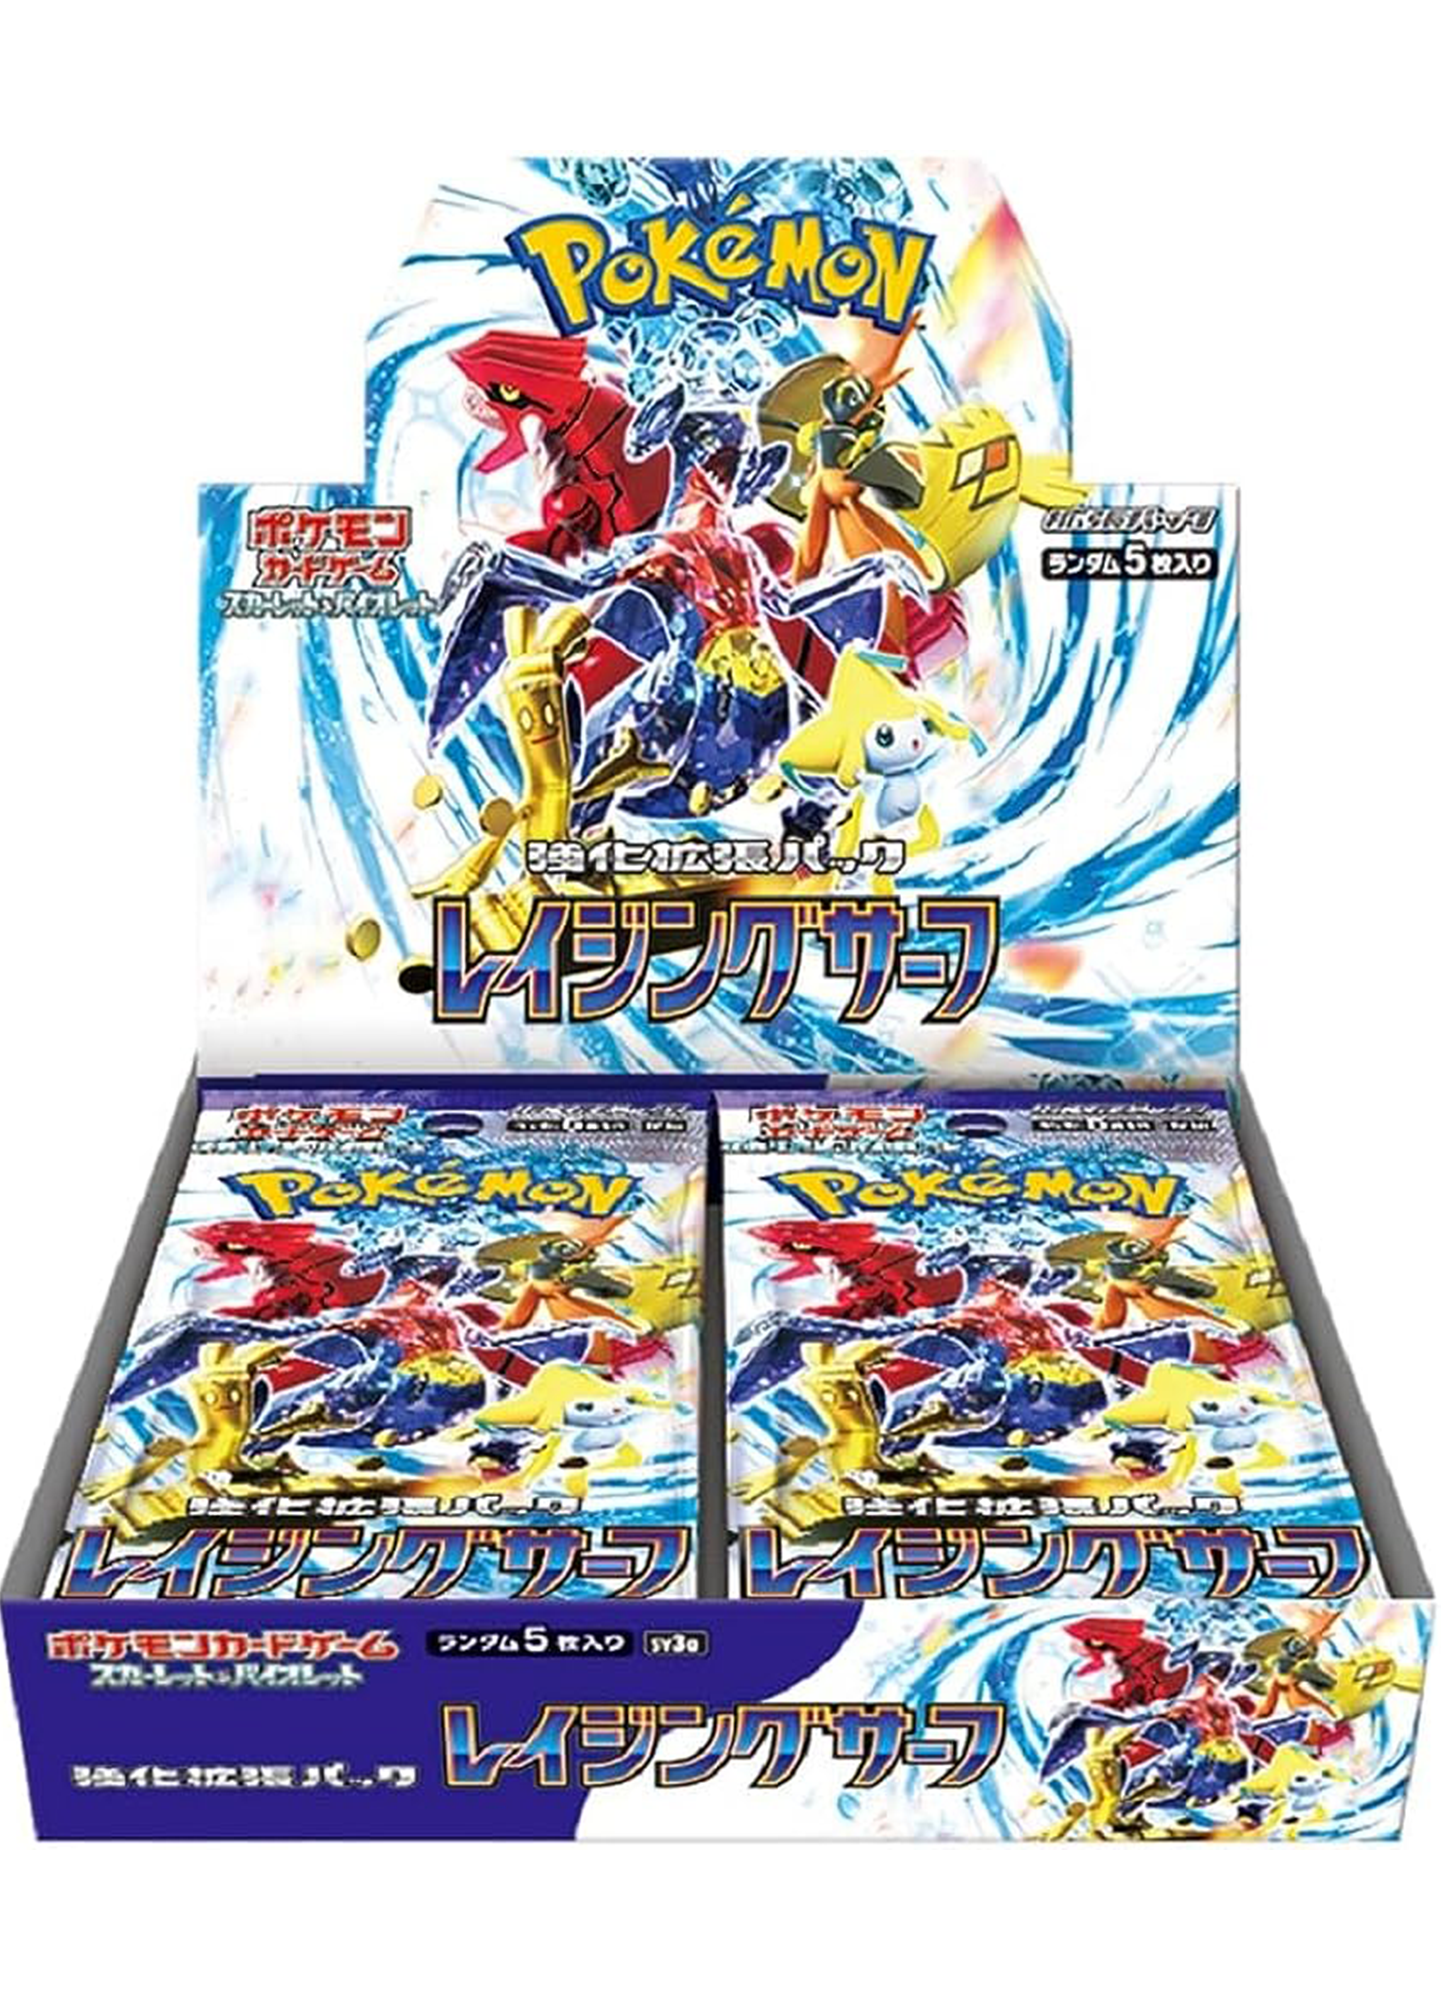 Raging Surf - Booster Box - Japanese